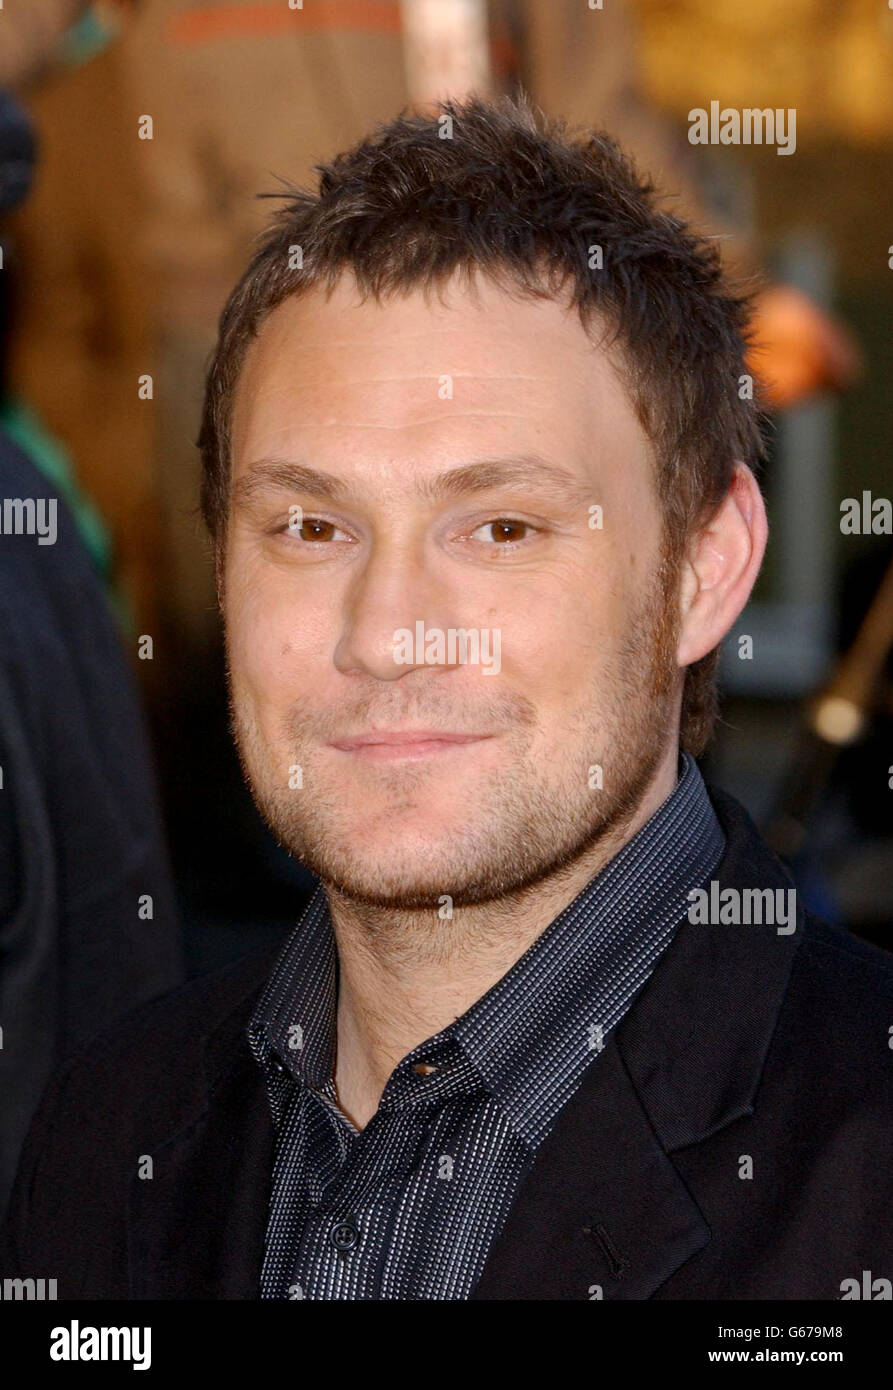 Singer David Gray arriving at Earls Court 2, London, for The Brit Awards 2003. Stock Photo